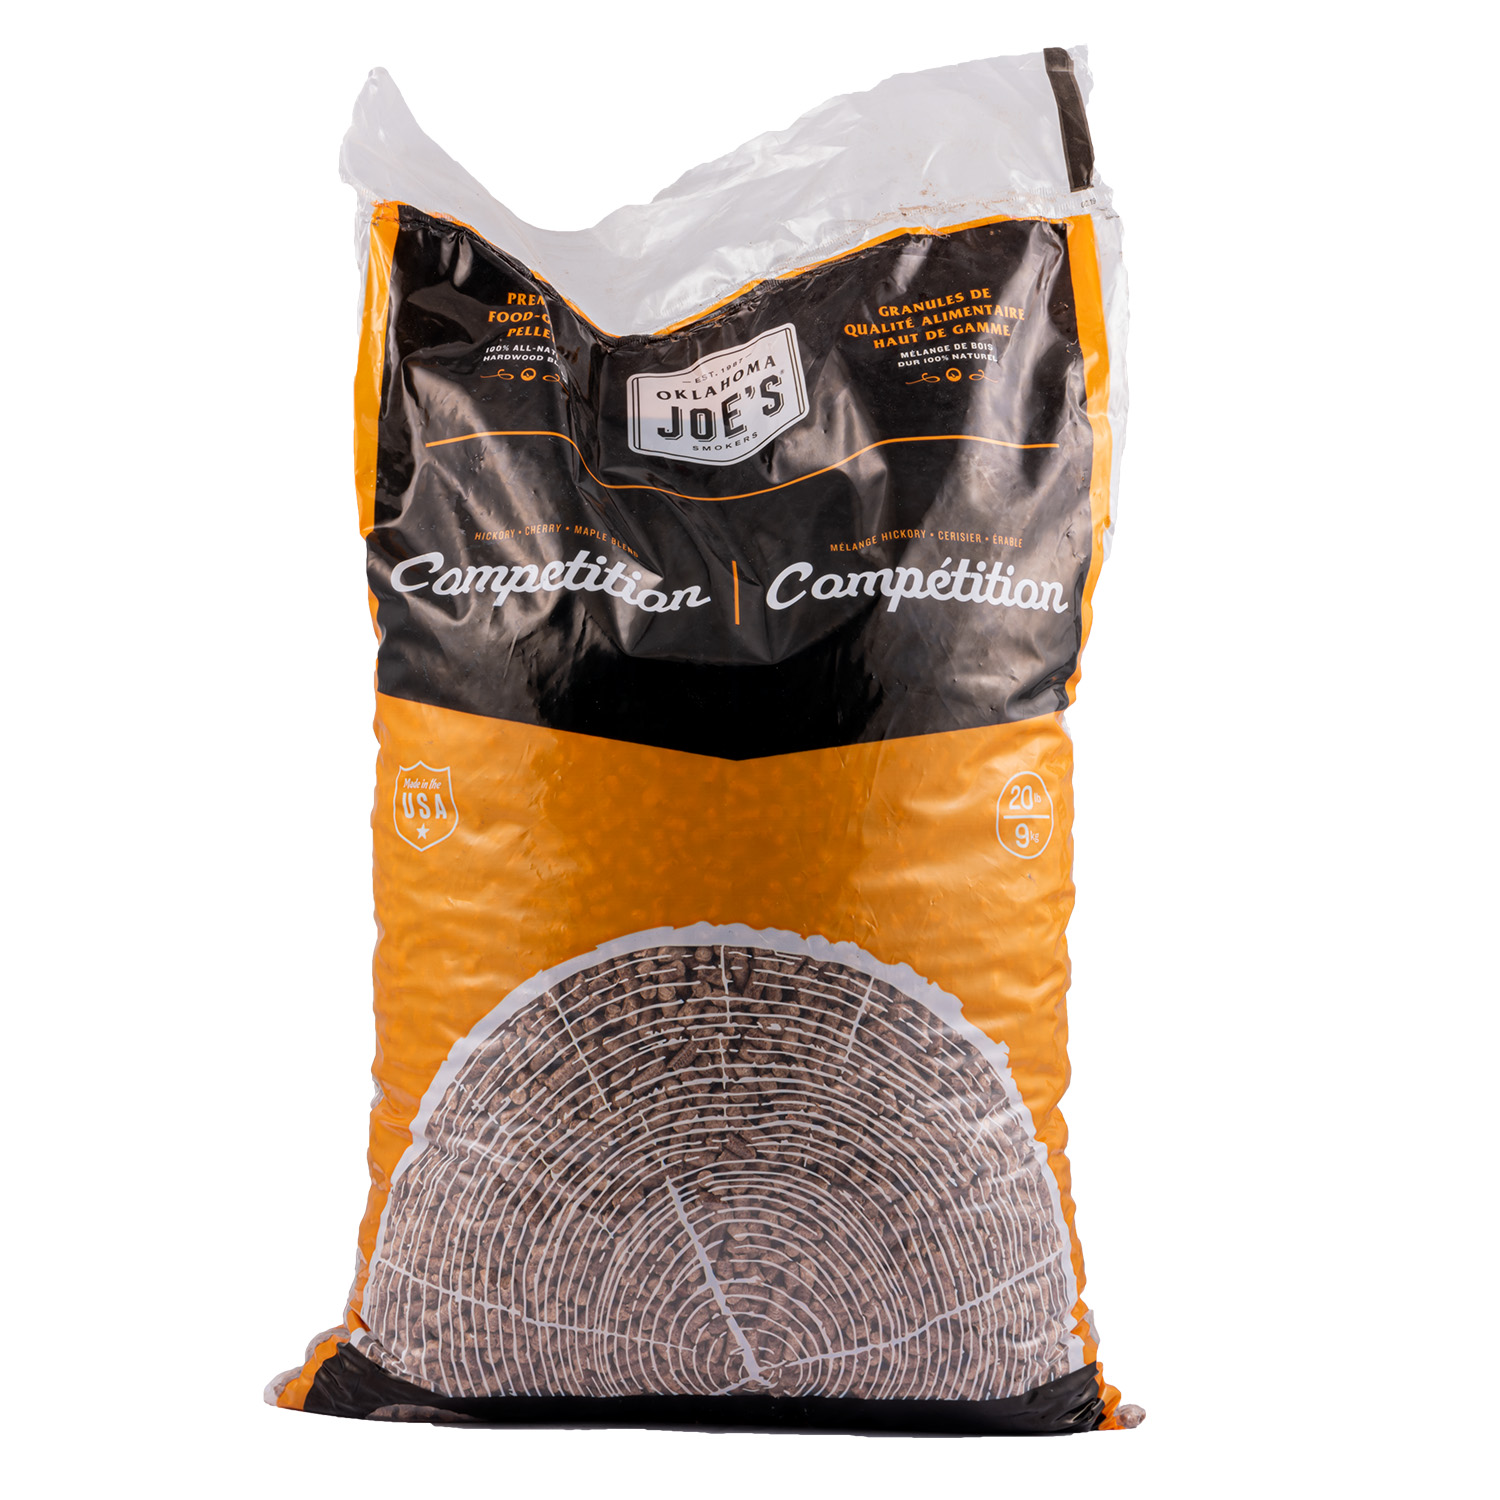 PELLETS ALIMENTAIRE HICKORY